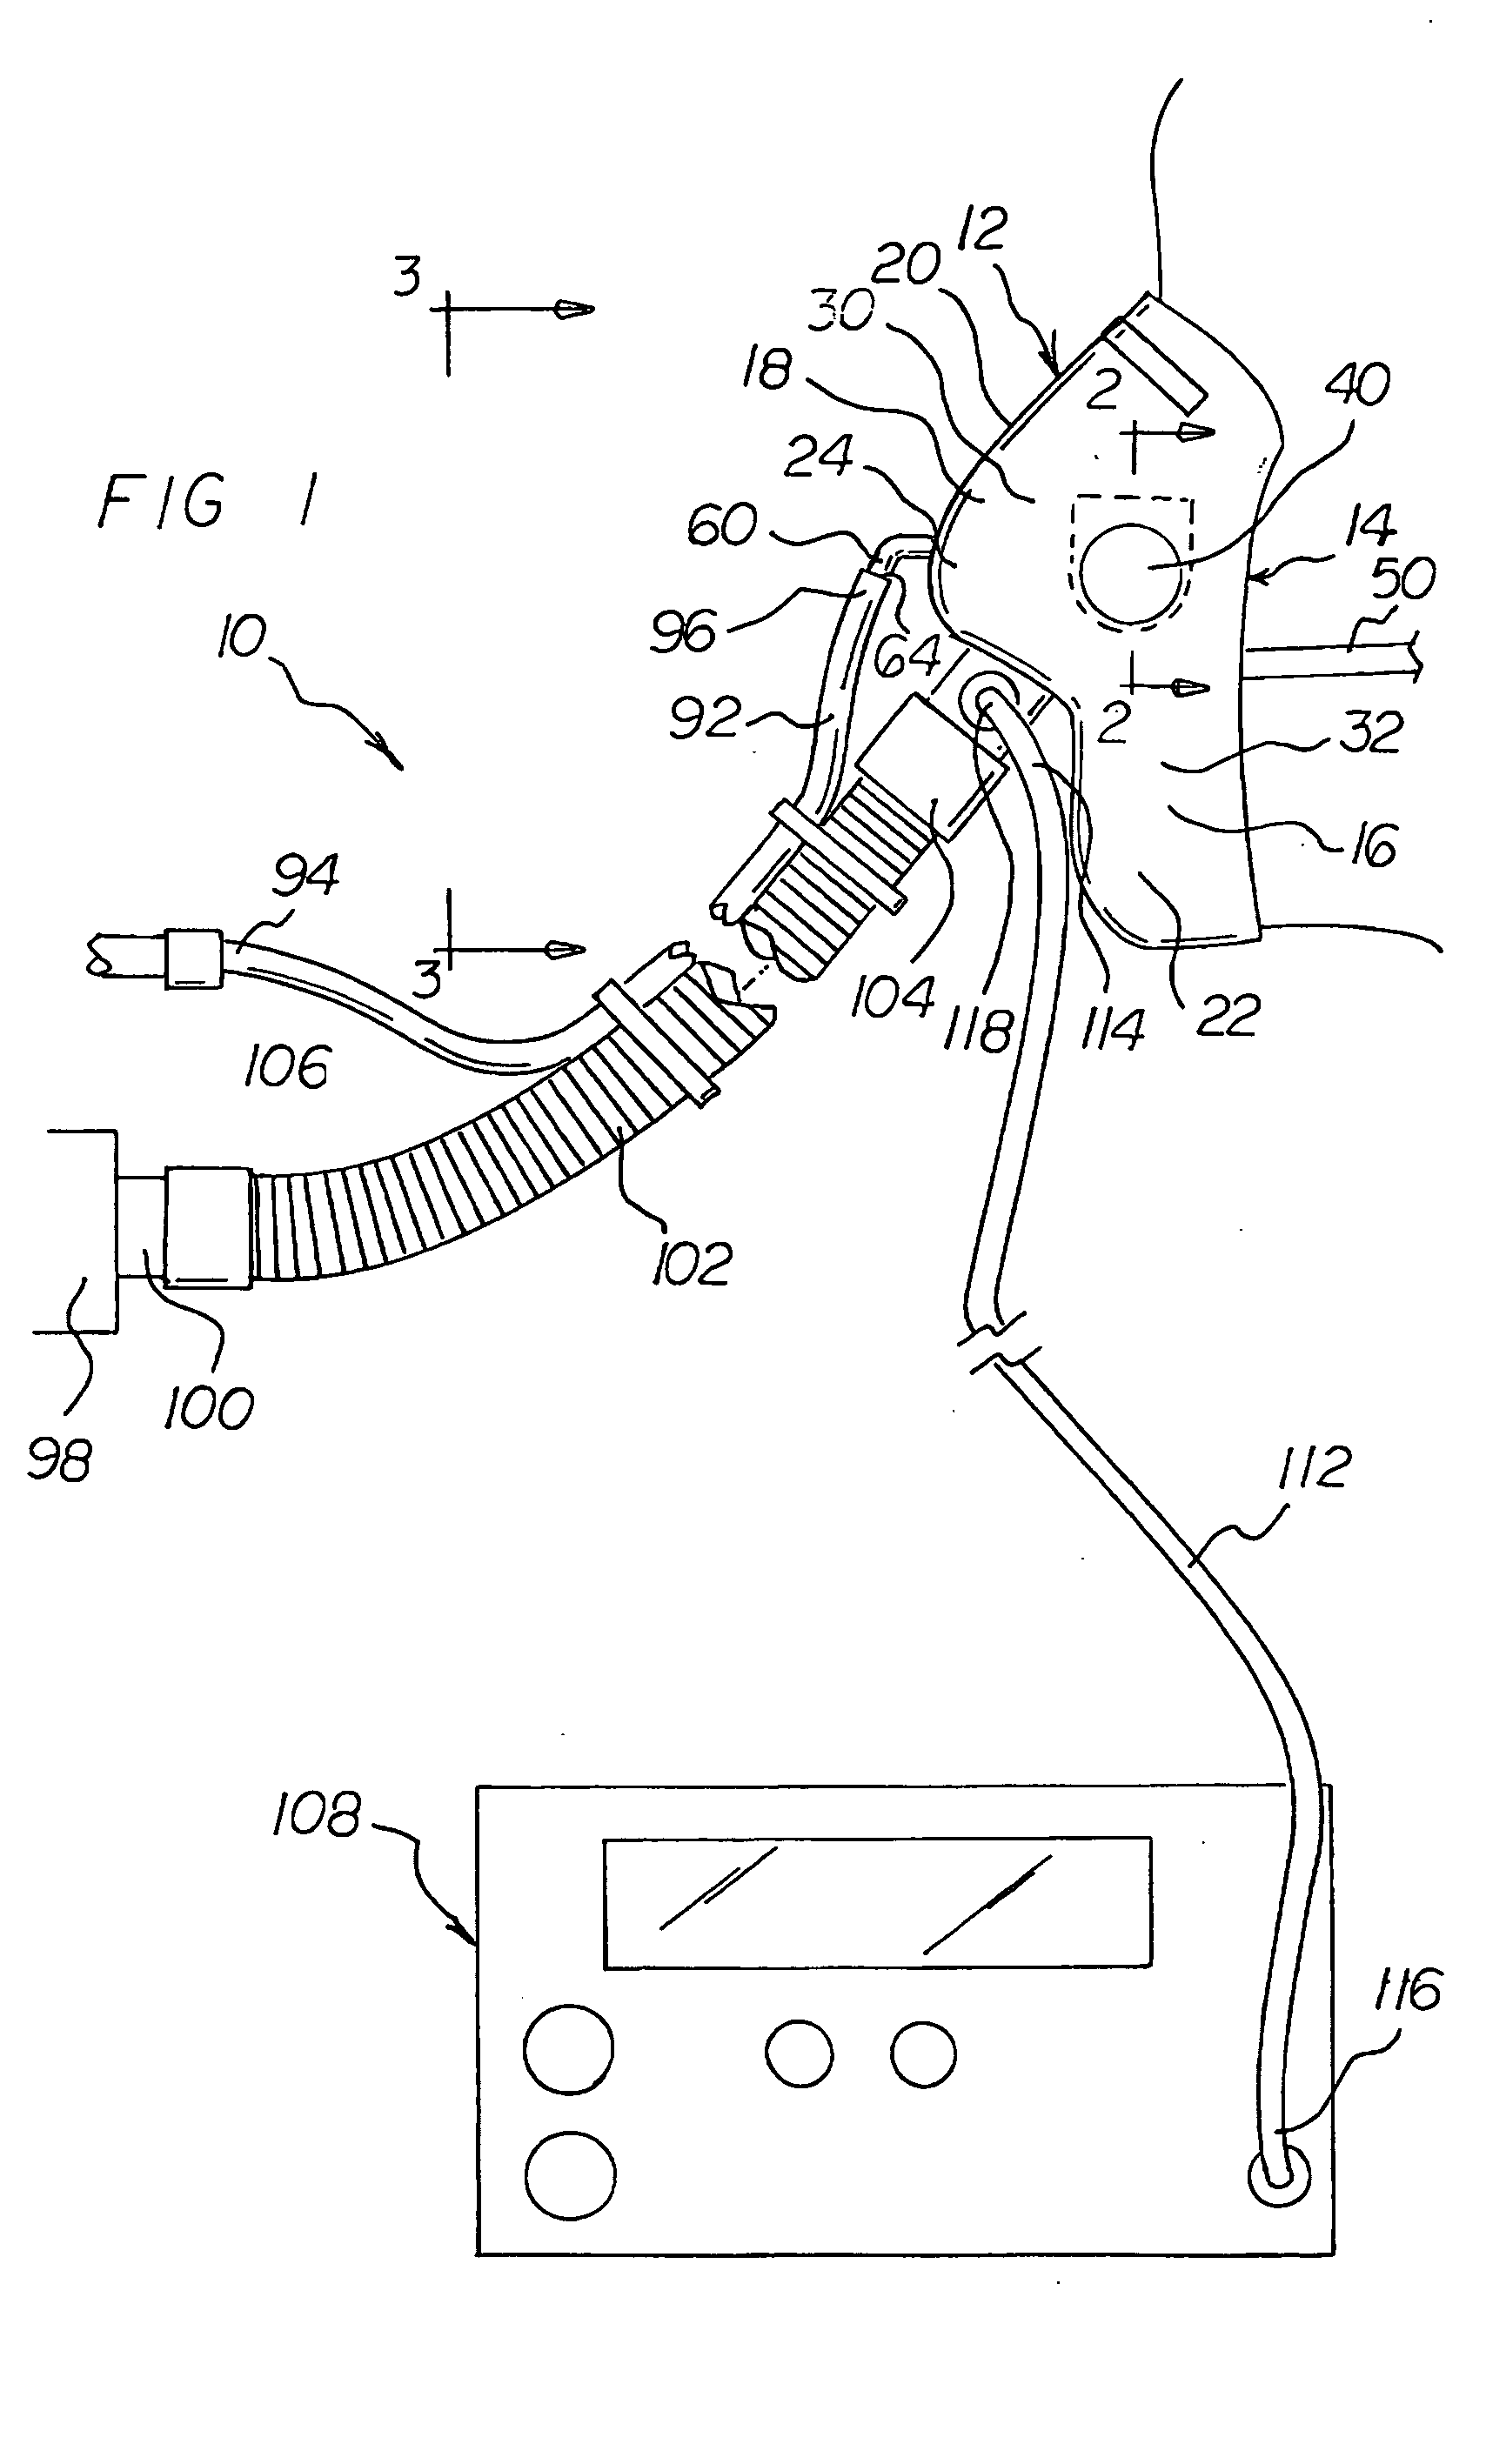 Gas delivery, evacuation and respiratory monitoring system and method